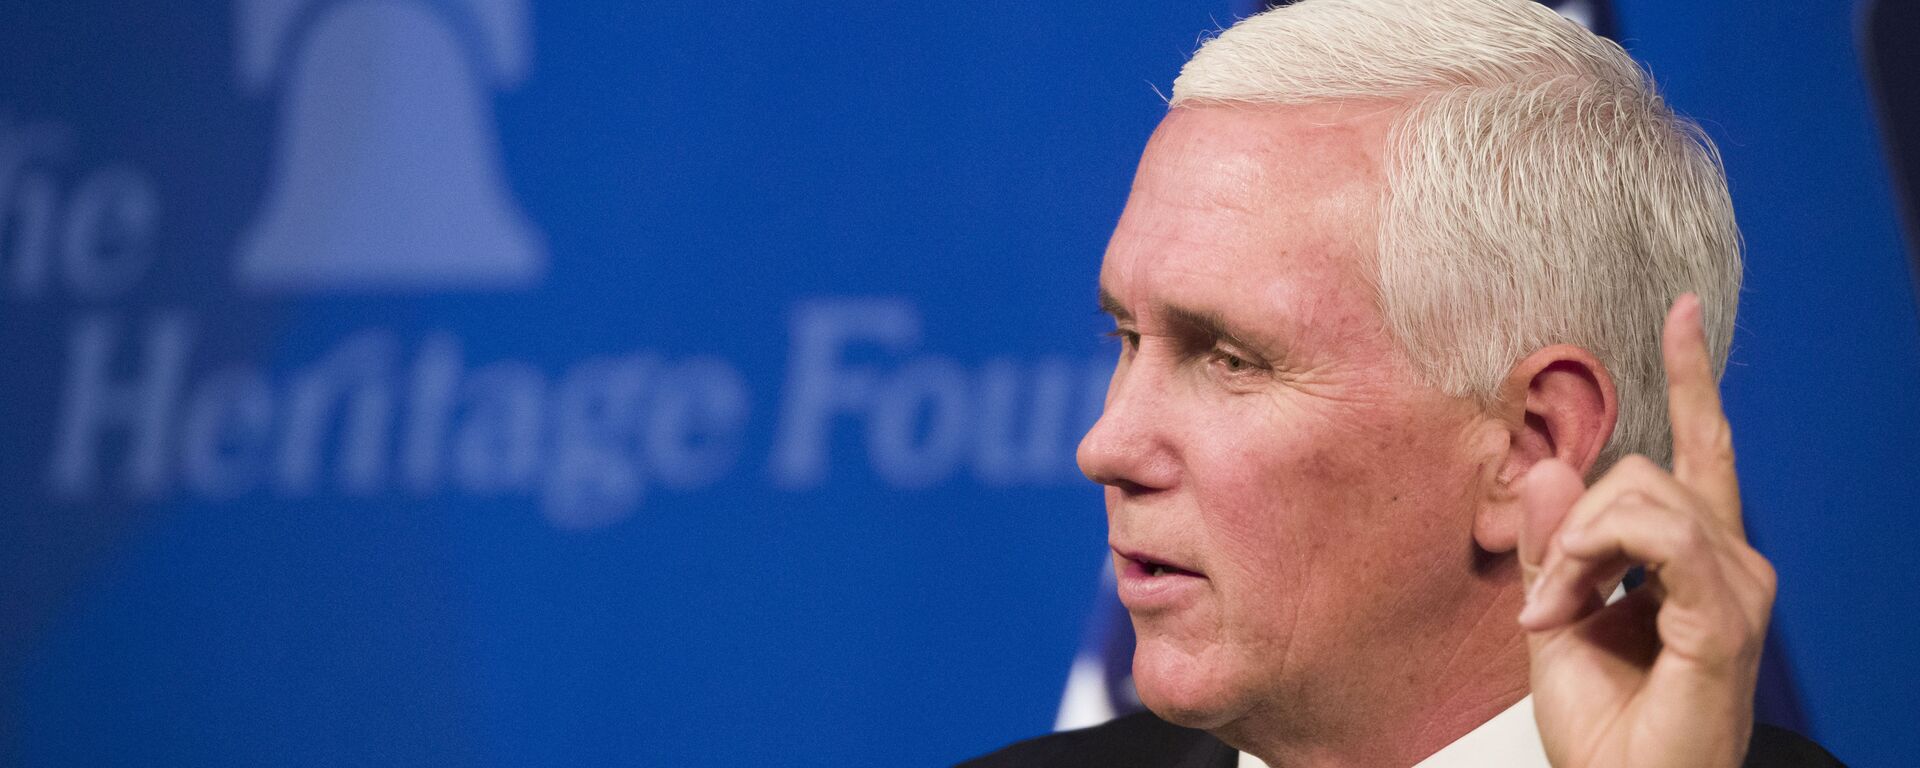 Vice President Mike Pence speaks about the US-Mexico-Canada trade agreement at the Heritage Foundation, Tuesday, 17 September 2019, in Washington. - Sputnik International, 1920, 25.06.2021